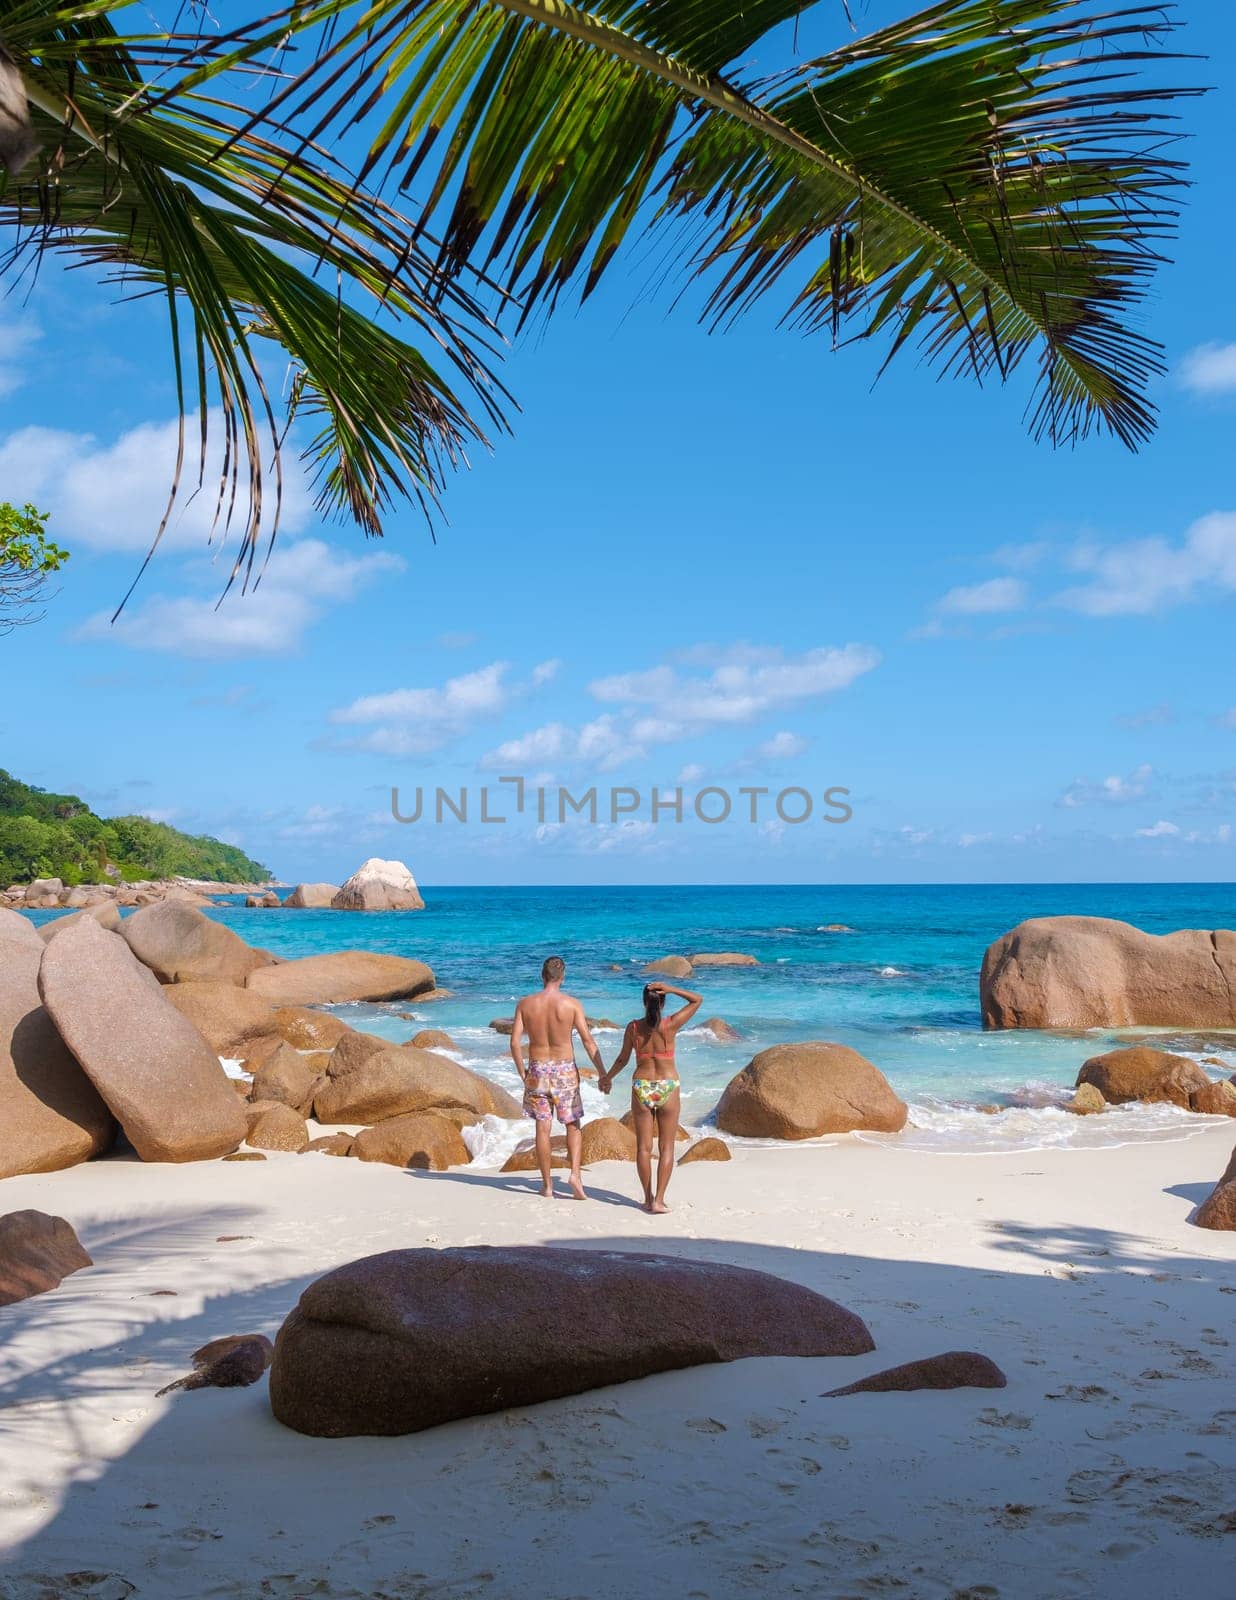 Anse Lazio Praslin Seychelles a young couple of men and women on a tropical beach during a luxury vacation there. Tropical beach Anse Lazio Praslin Seychelles Islands on a sunny day with a blue sky